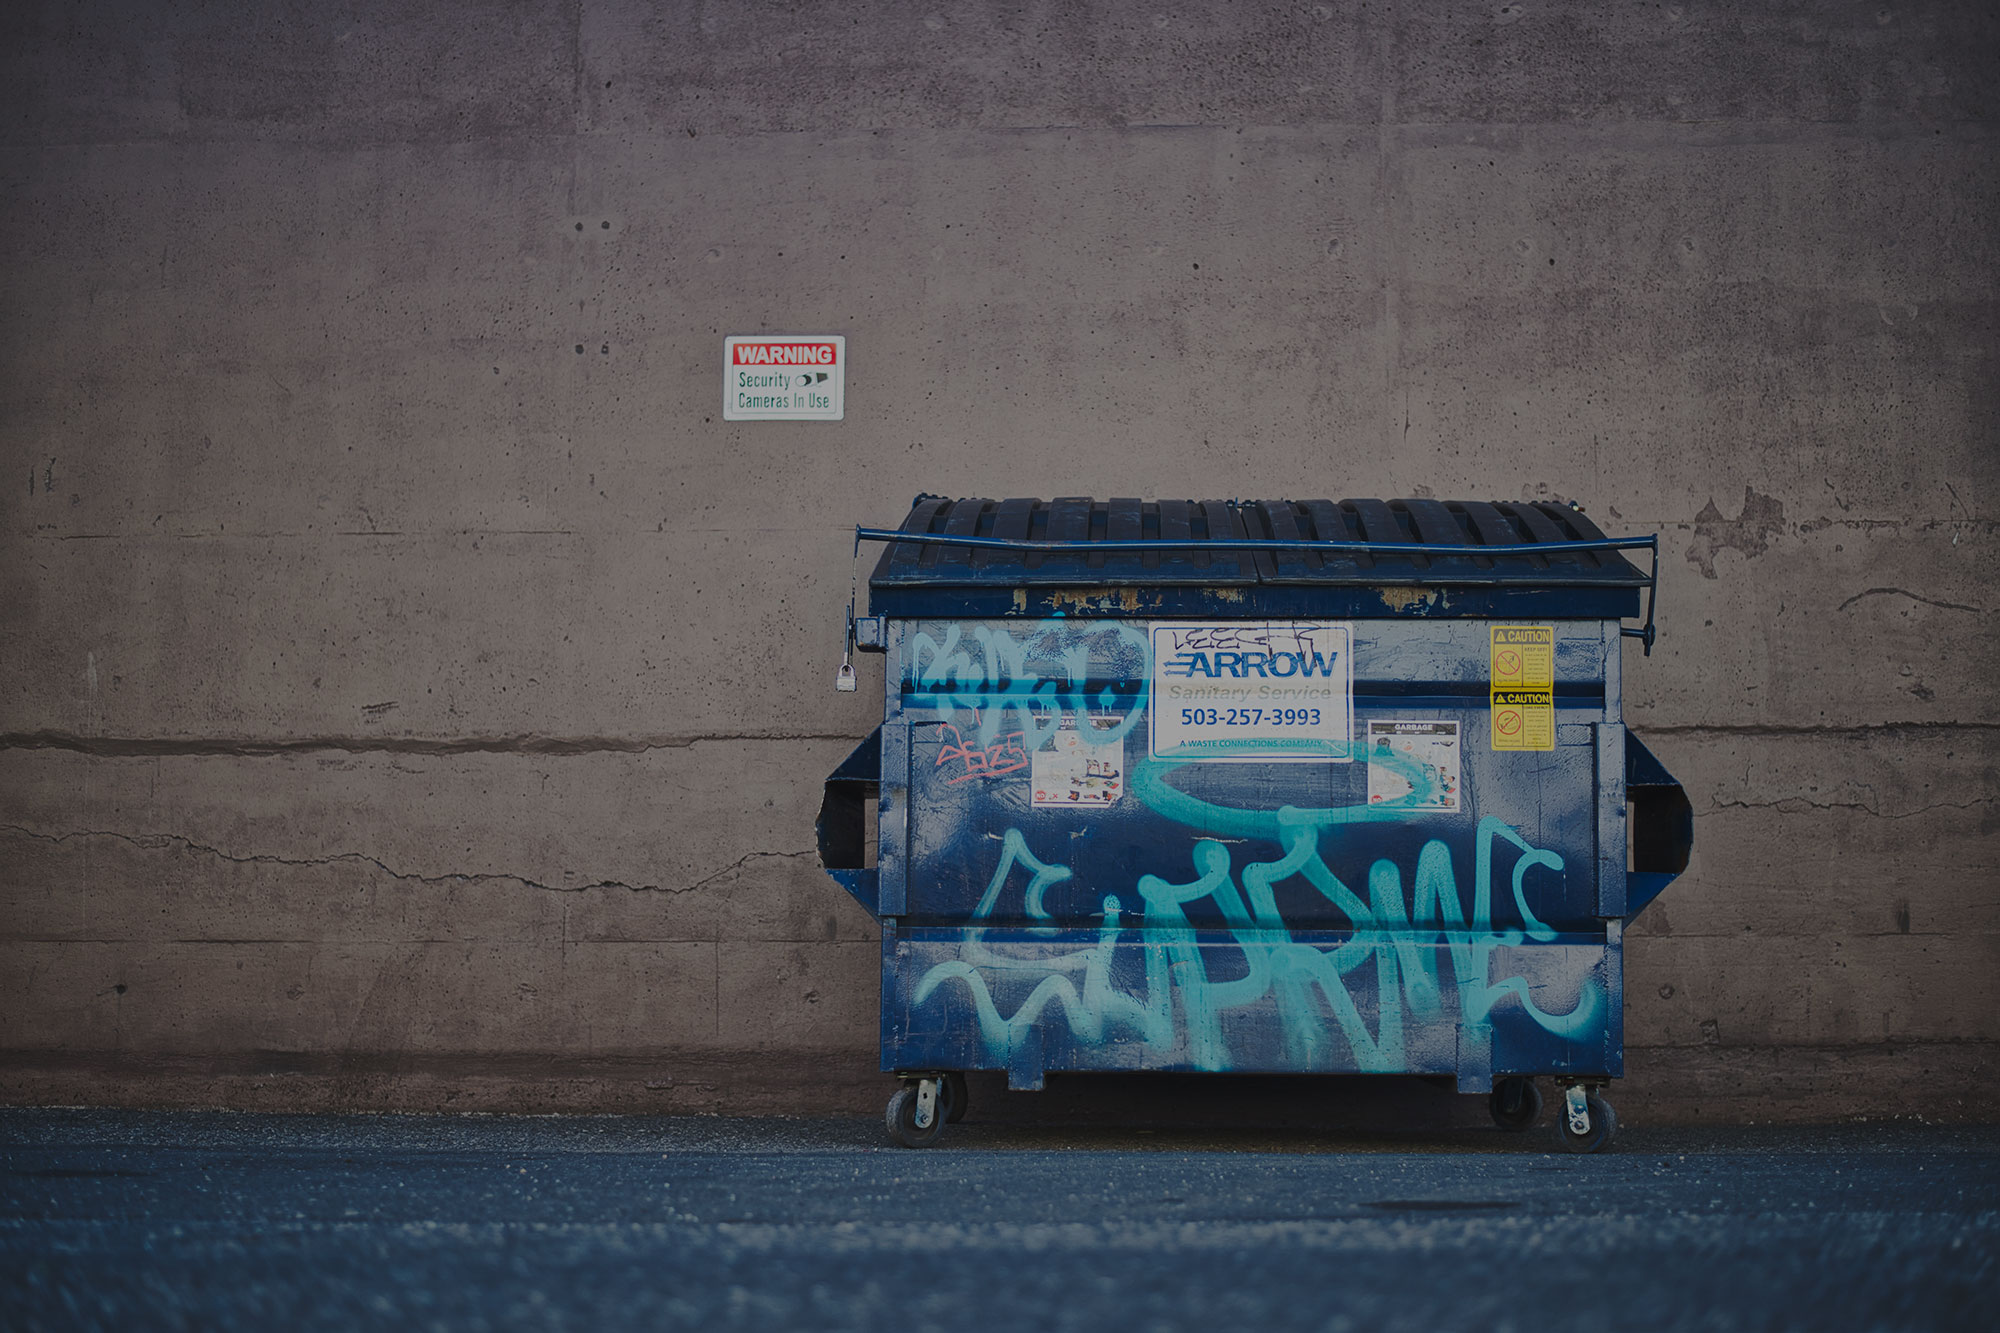 Dumpster Diving: The Reason So Much Content Marketing Is So… Awful